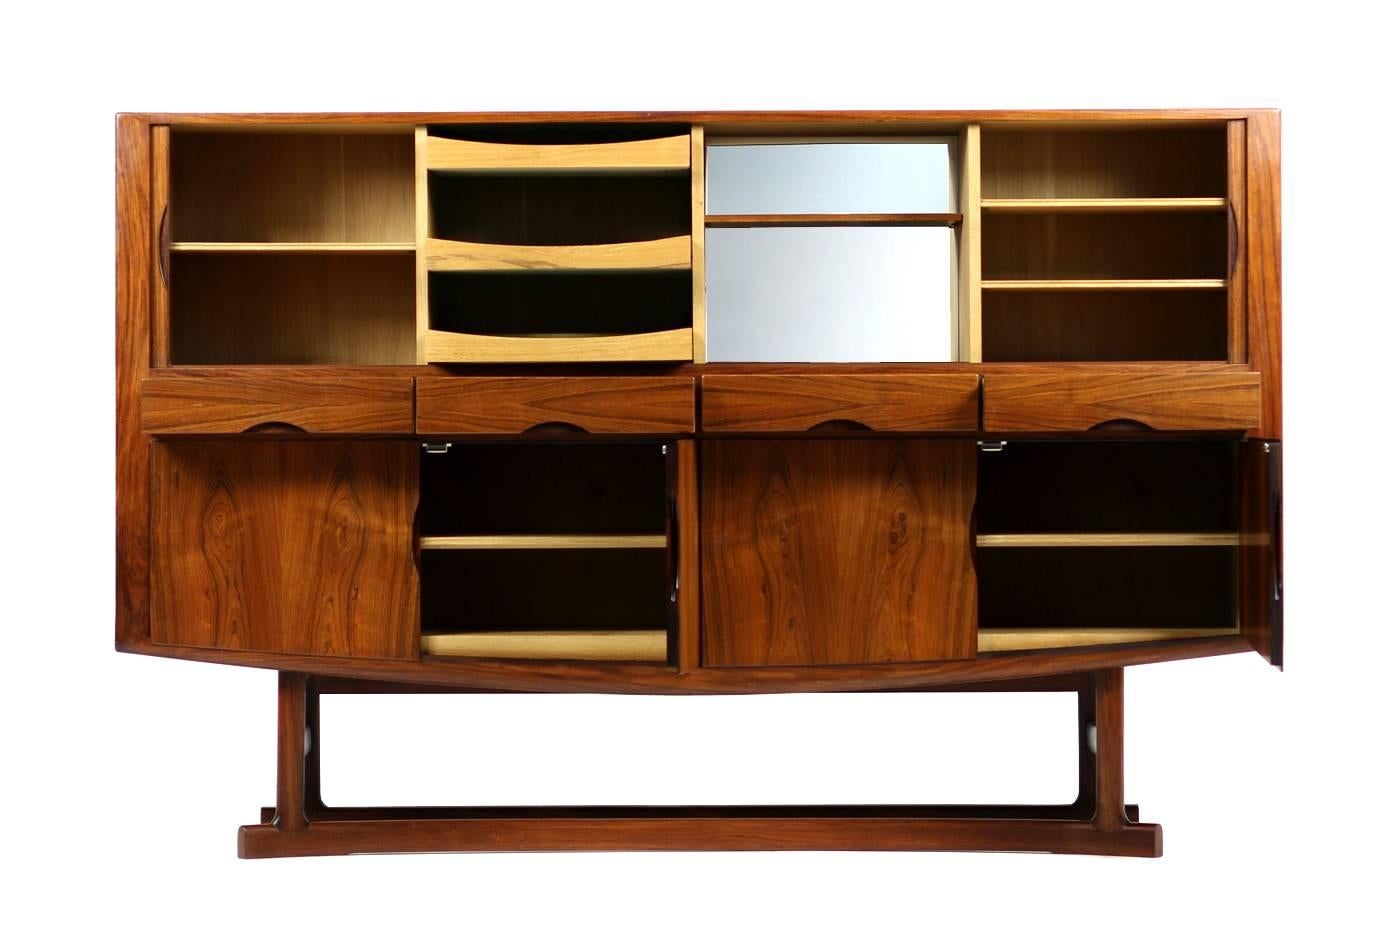 Beautiful and in an amazing condition very rare Johannes Andersen Highboard Mod HB20 for Hans Bech, Denmark. Hard to find a highboard, as it was limited in production in the 1960s

Beautiful, fantastic details, unique craftmanshiop, normal doors and